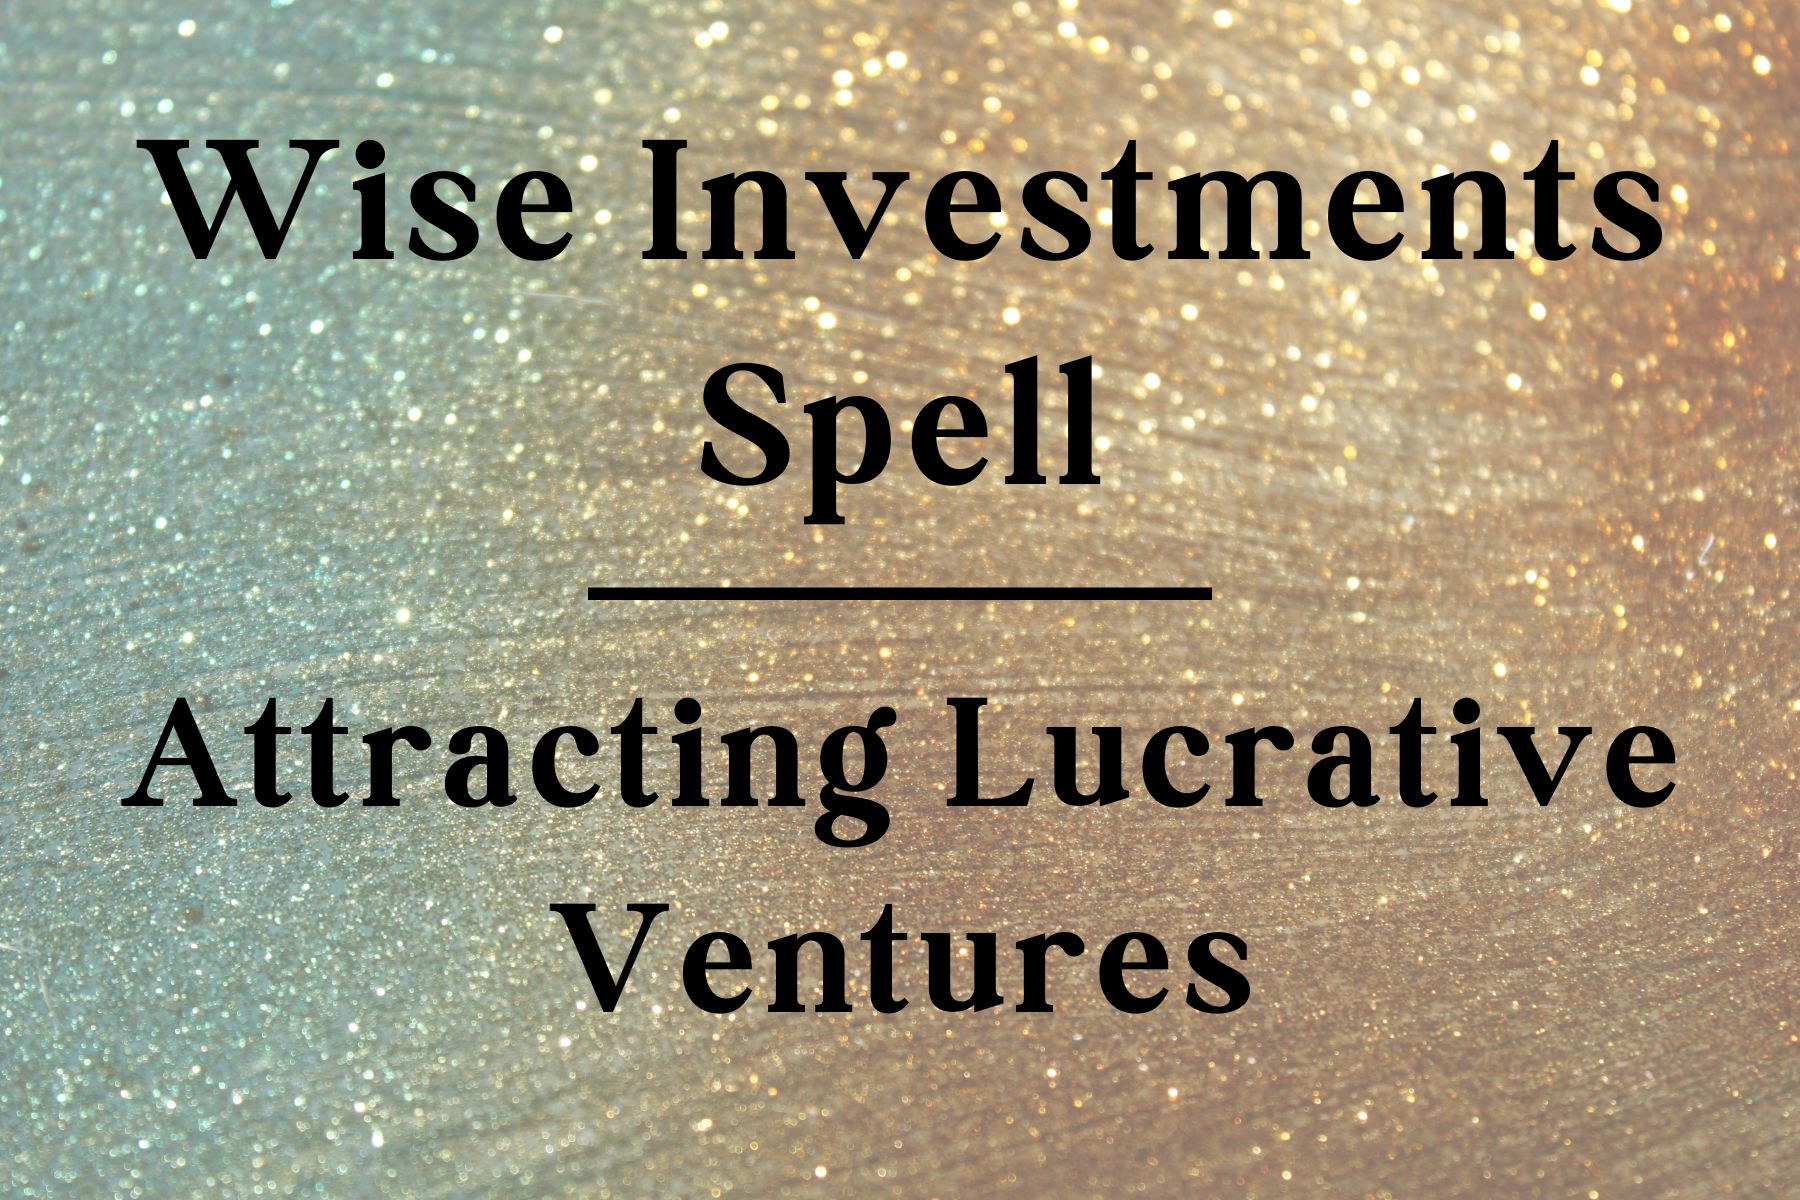 Wise Investments Spell: Attracting Lucrative Ventures